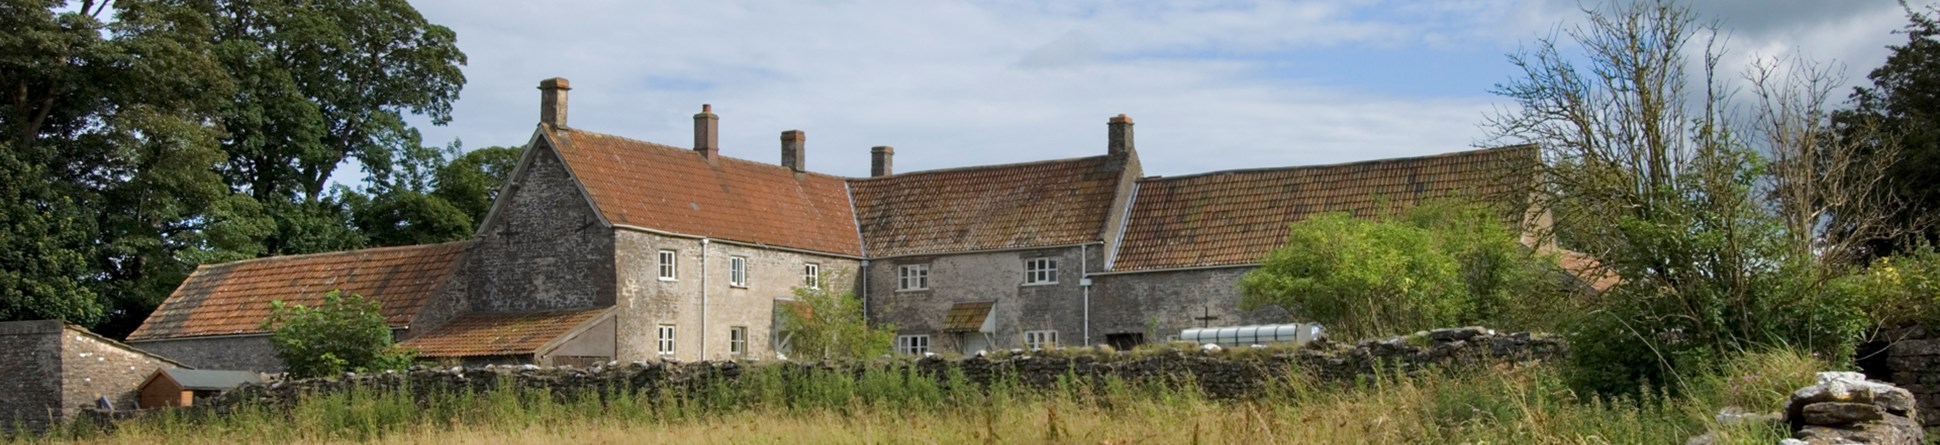 L-shaped stone farmstead in rural setting in Priddy, Somerset